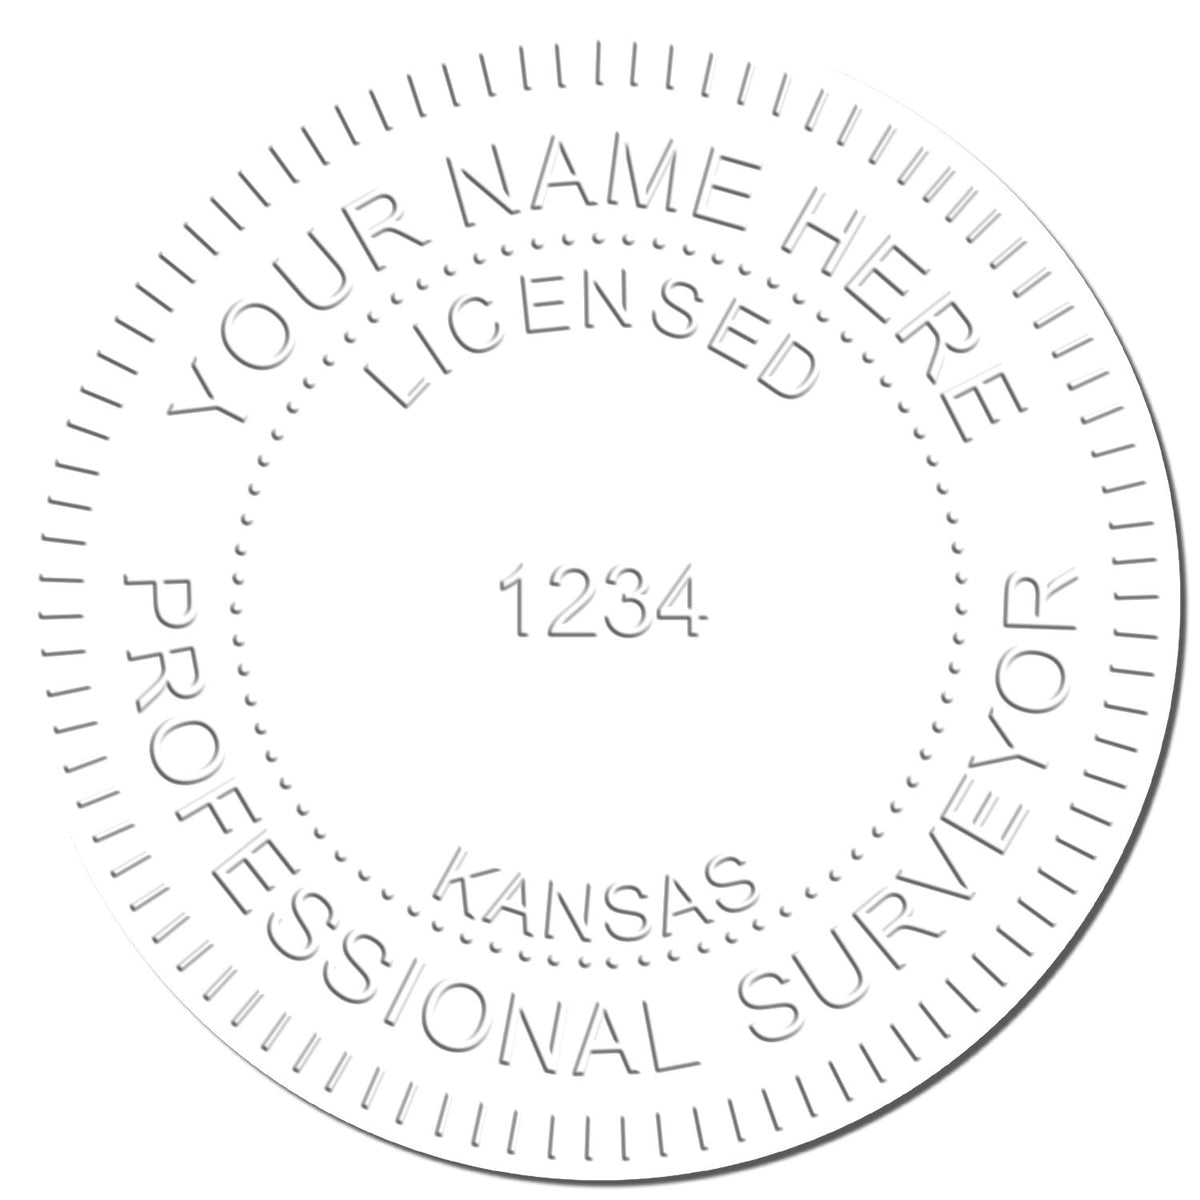 This paper is stamped with a sample imprint of the Long Reach Kansas Land Surveyor Seal, signifying its quality and reliability.